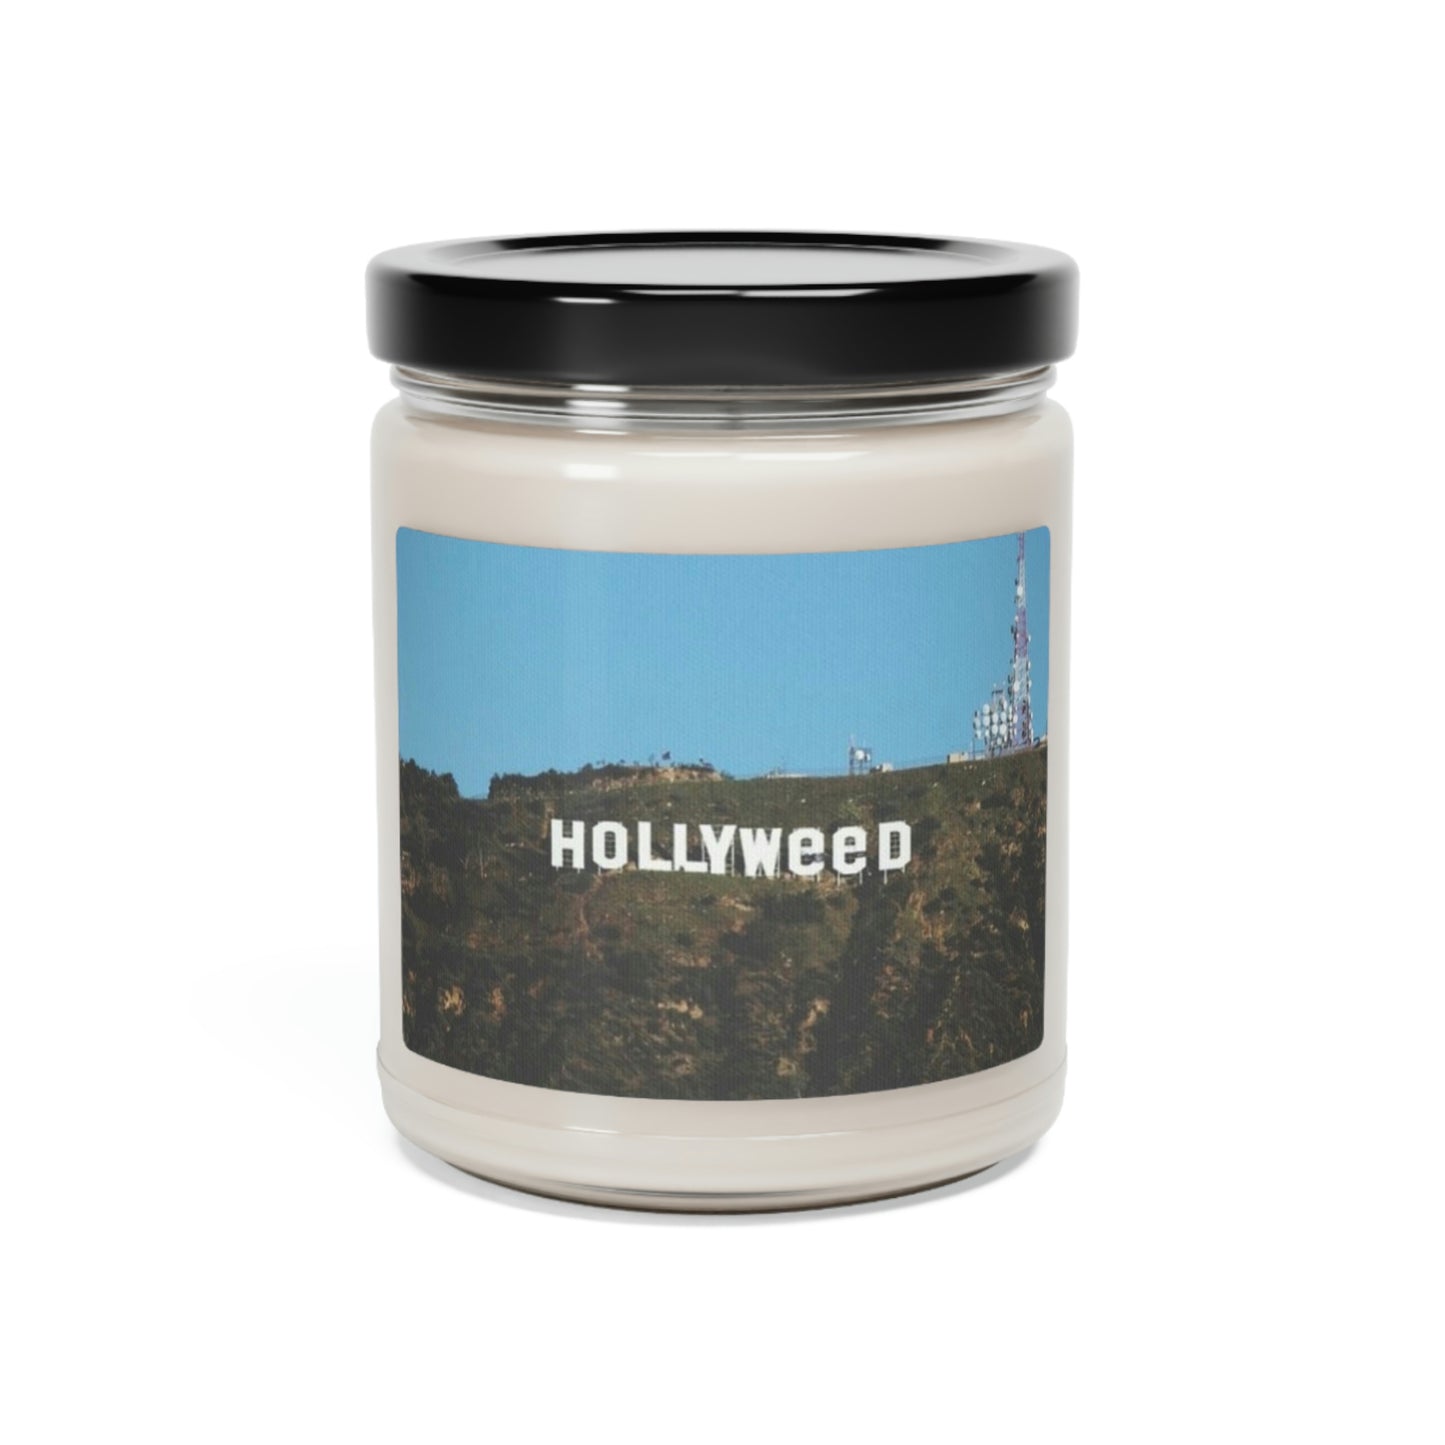 Hollywood Scented Soy Candle